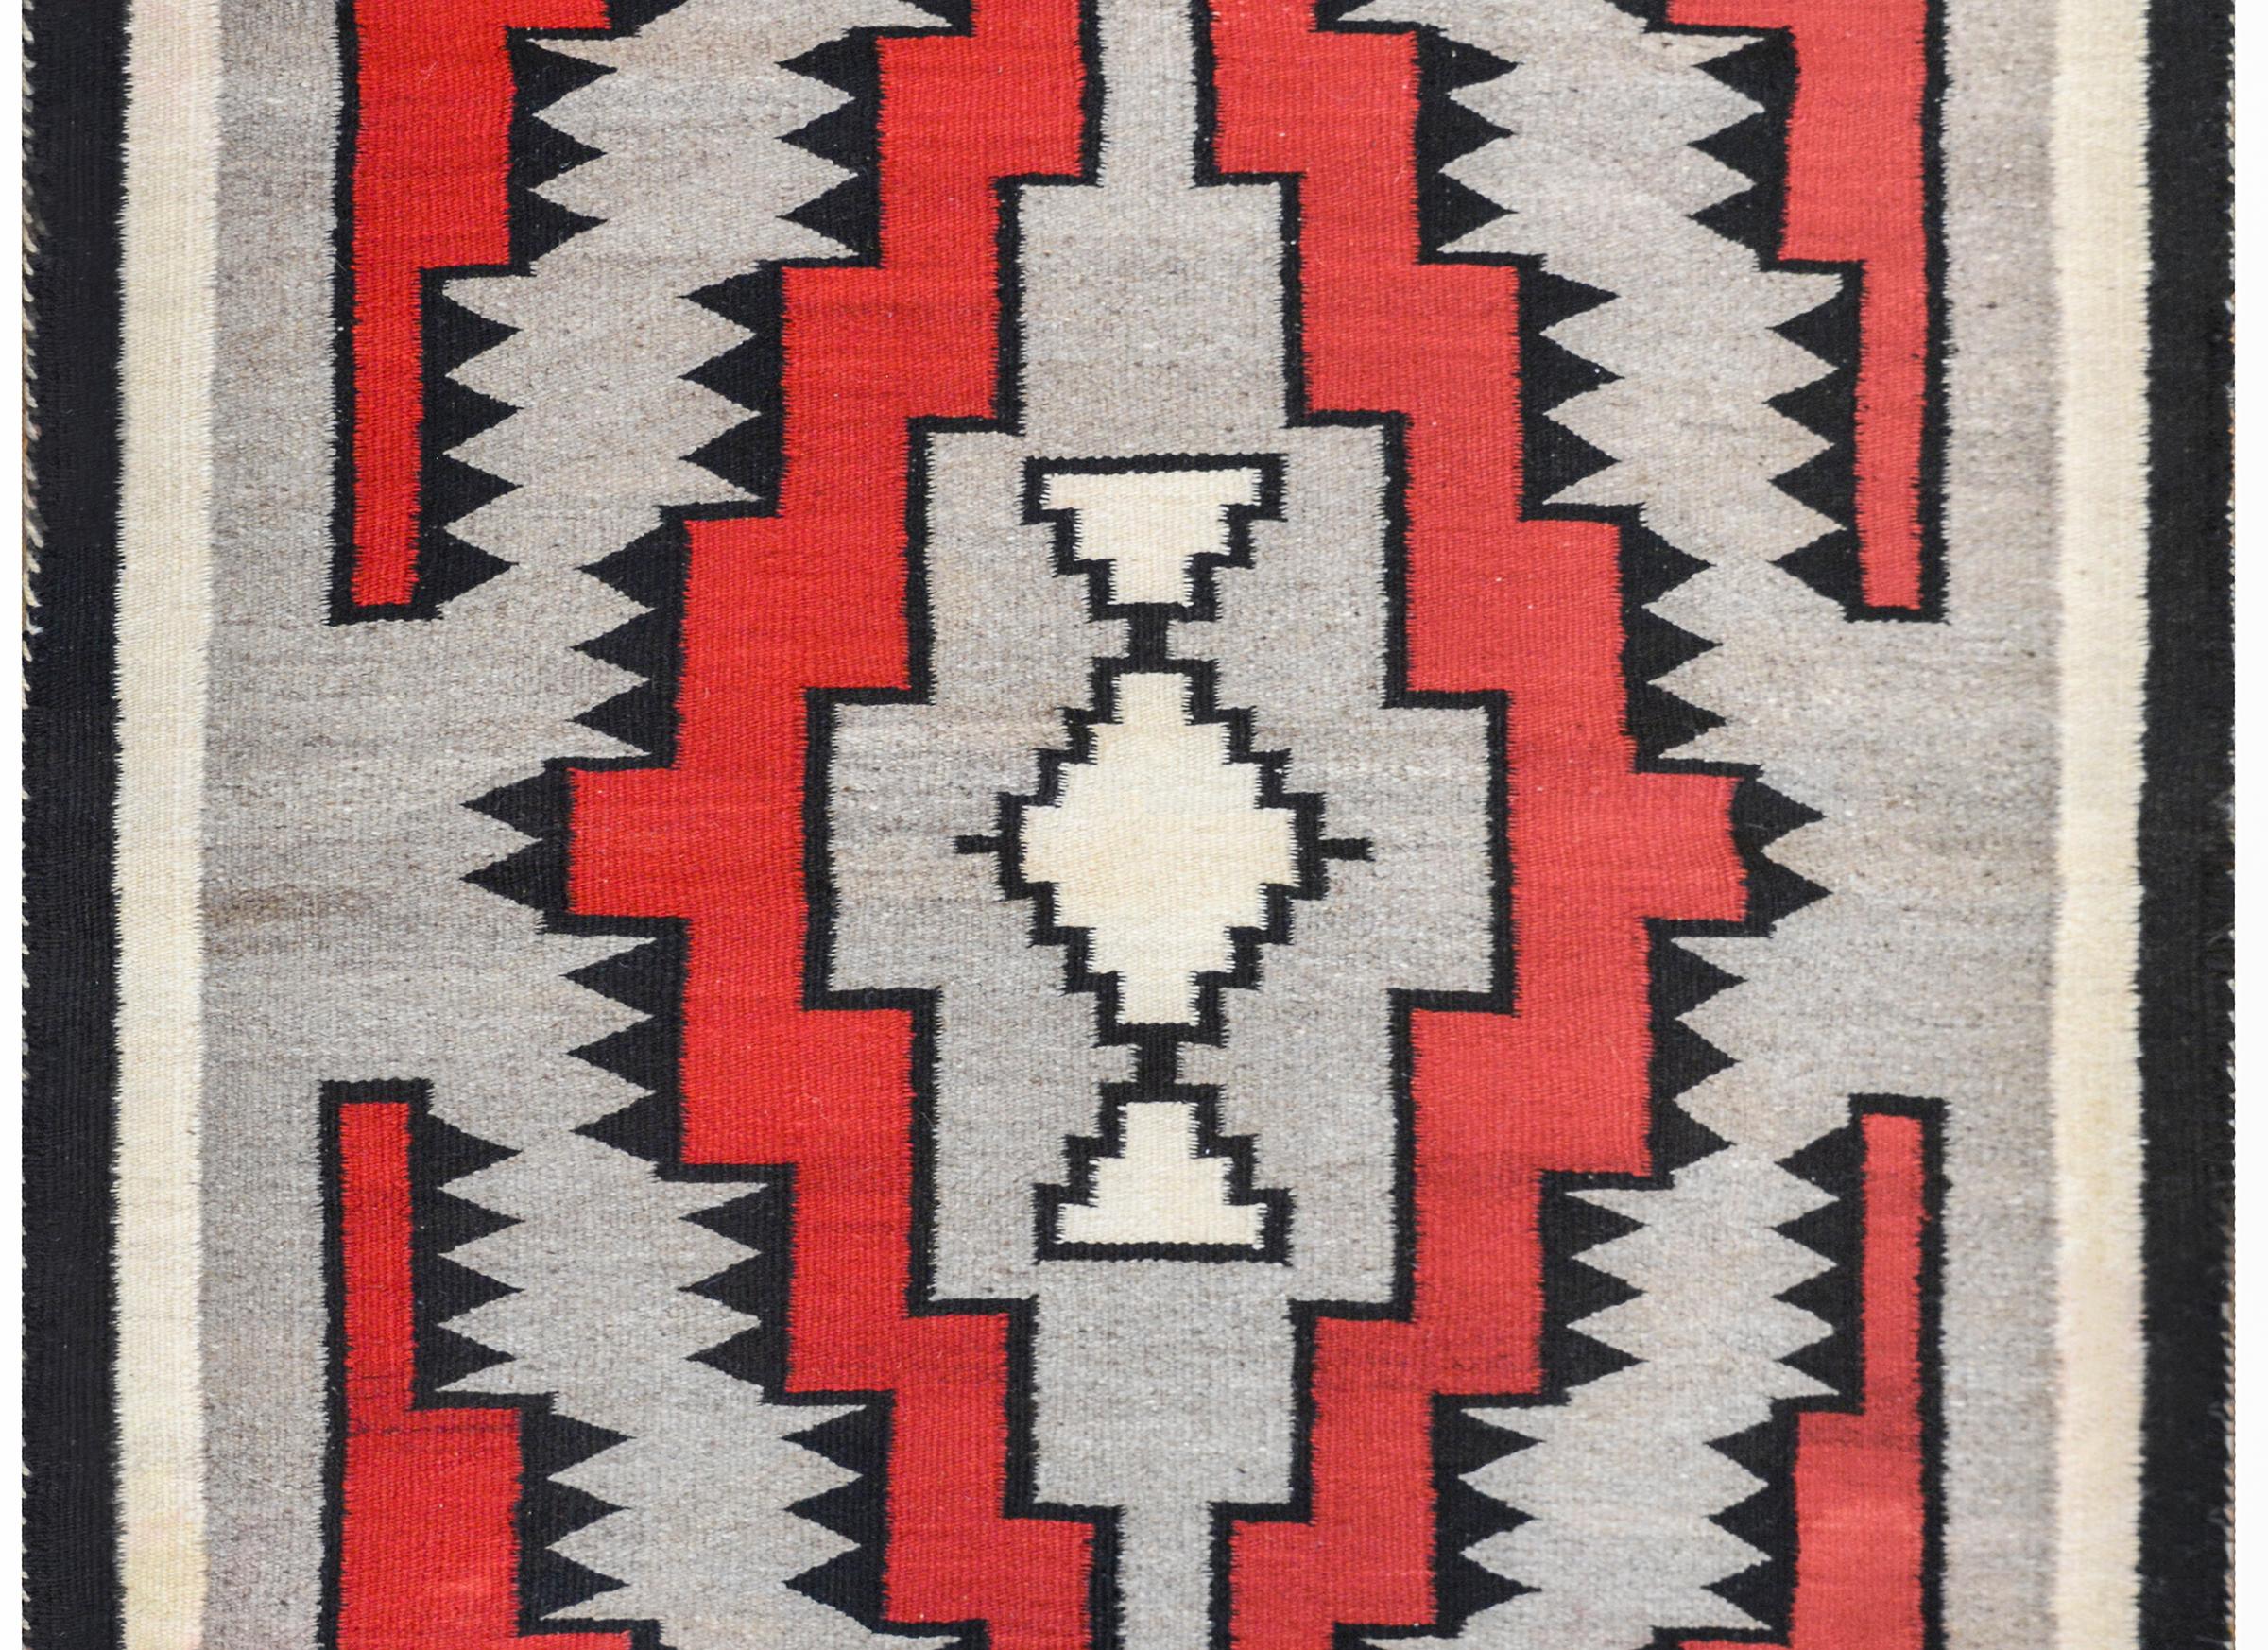 A gorgeous early 20th century Navajo rug with a fantastic pattern containing stepped crimson and gray diamonds trimmed with black triangles, all on a gray background. The border is simple with solid black and cream colored stripes.